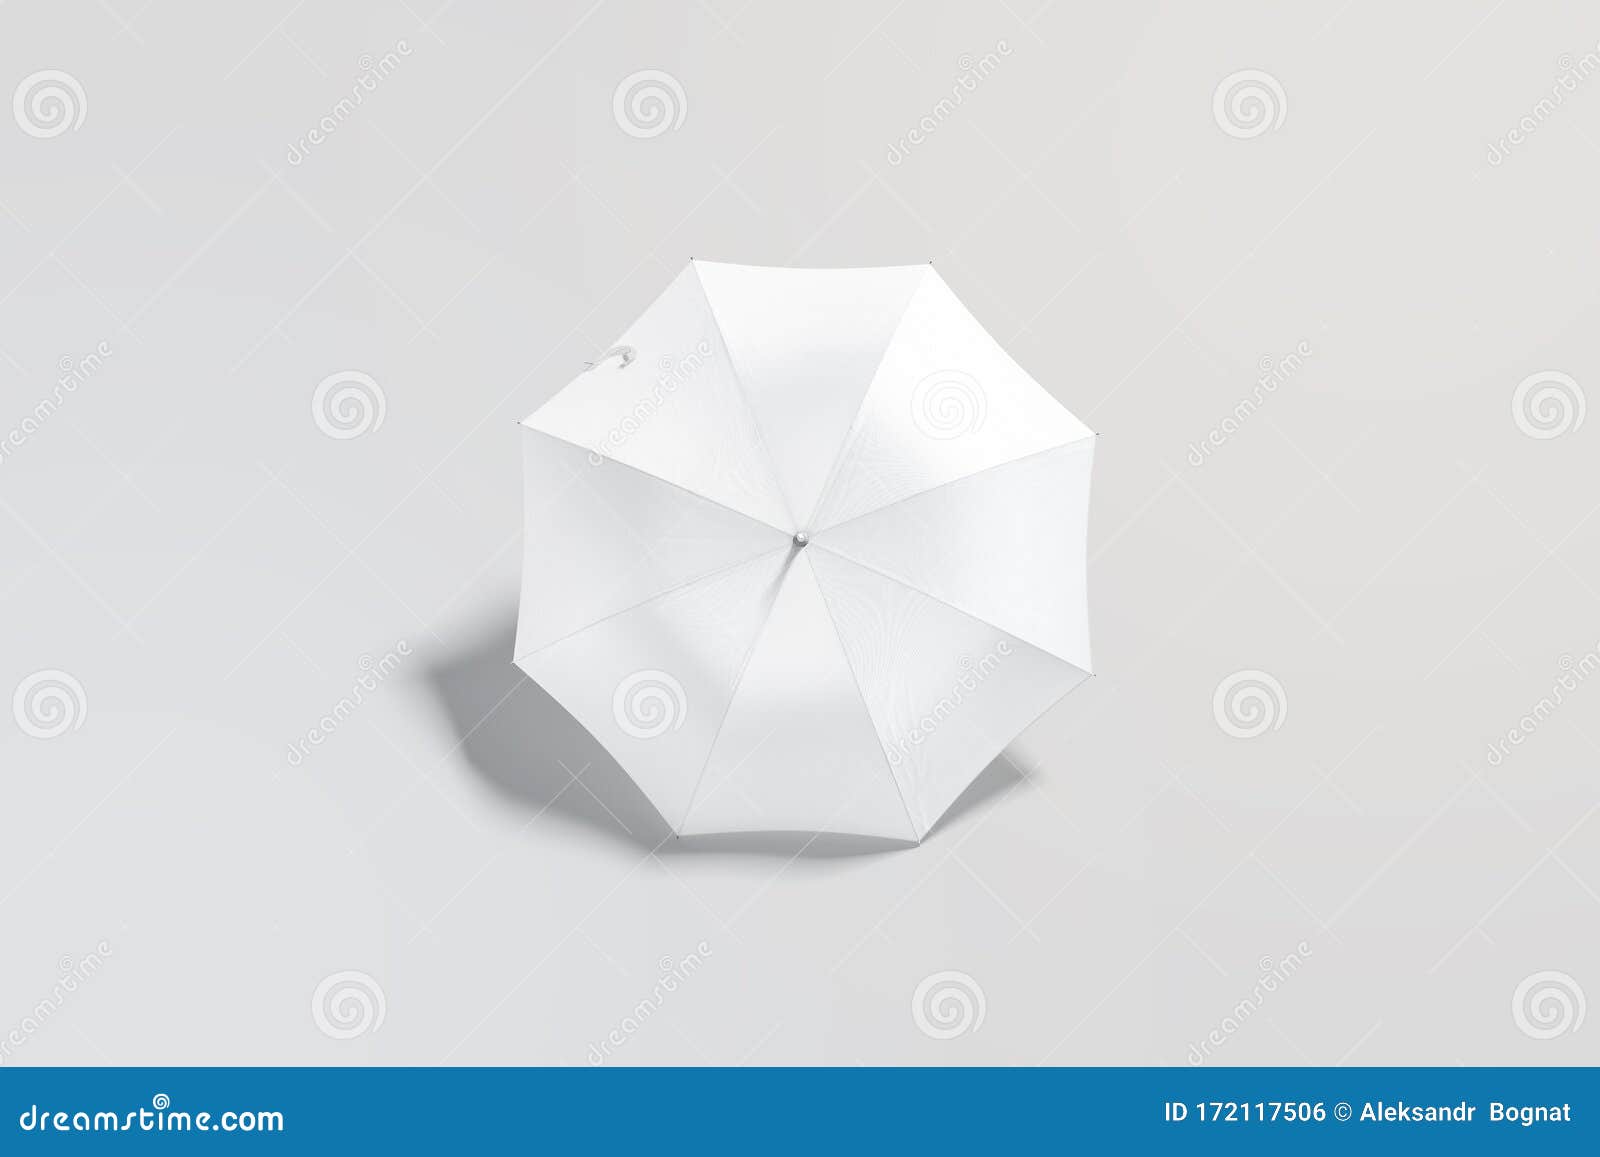 Download Blank White Open Umbrella Mock Up Lying, Backside View ...